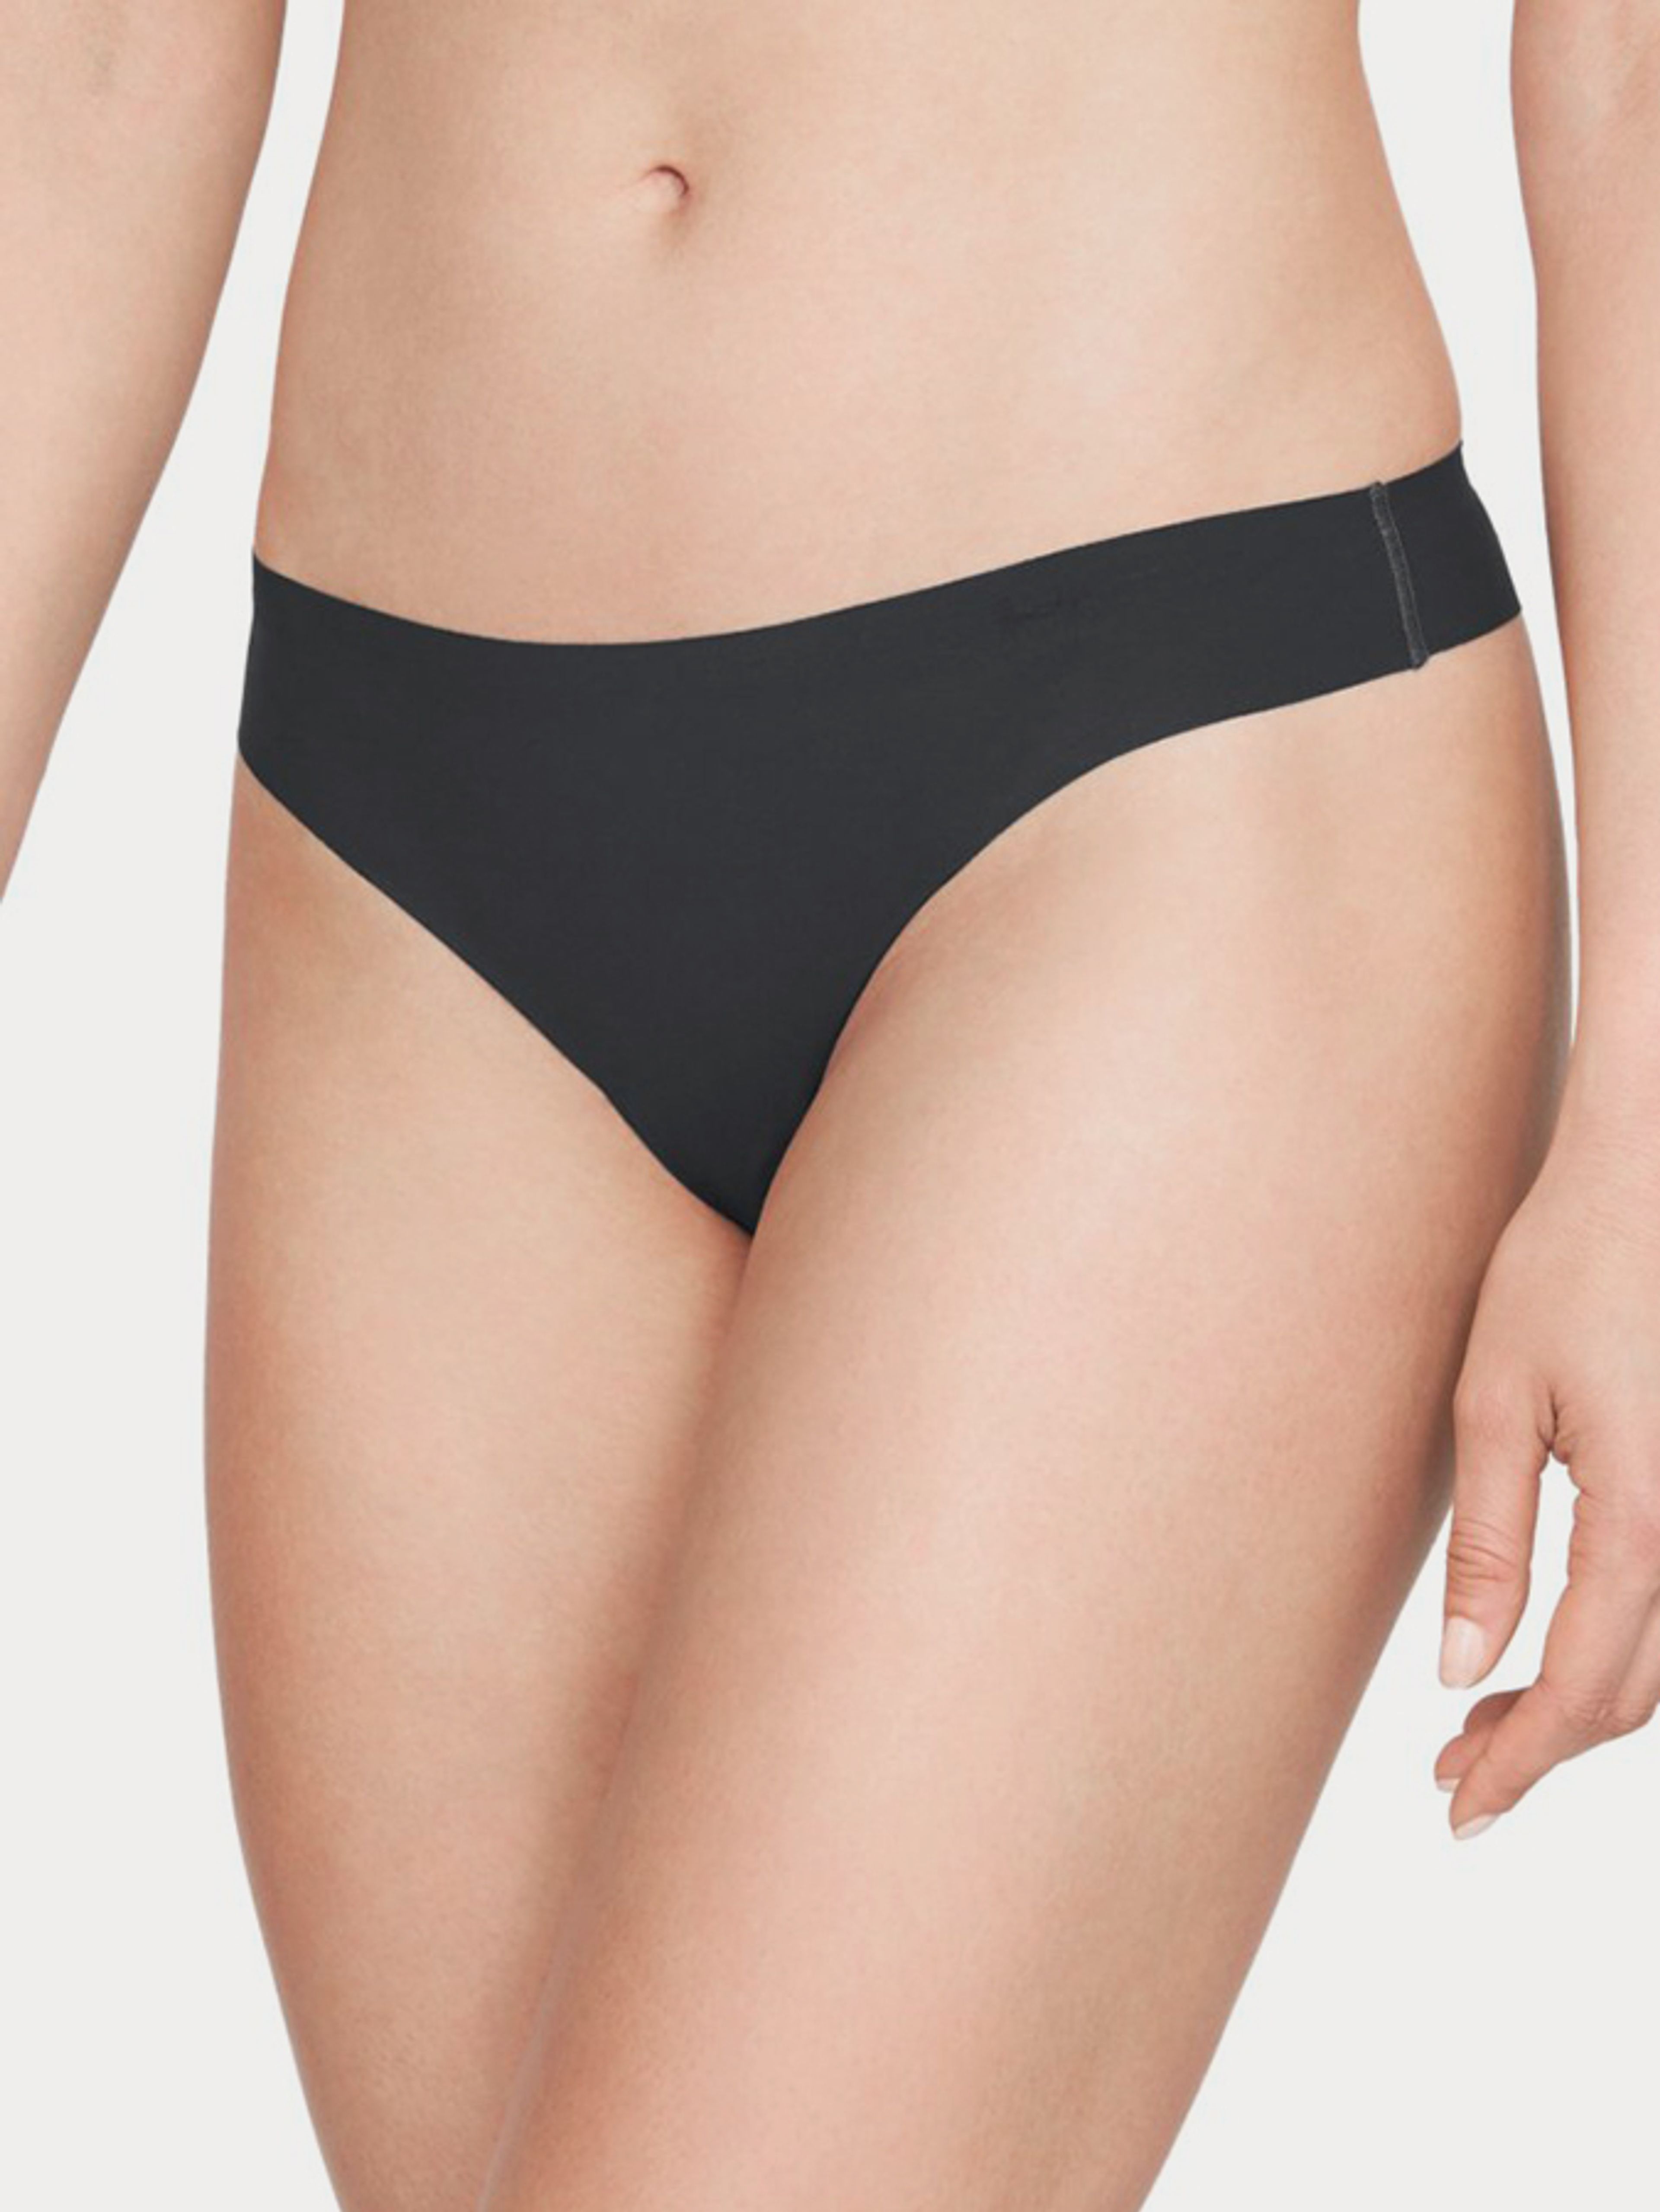 Tanga Under Armour PS Thong 3Pack -BLK